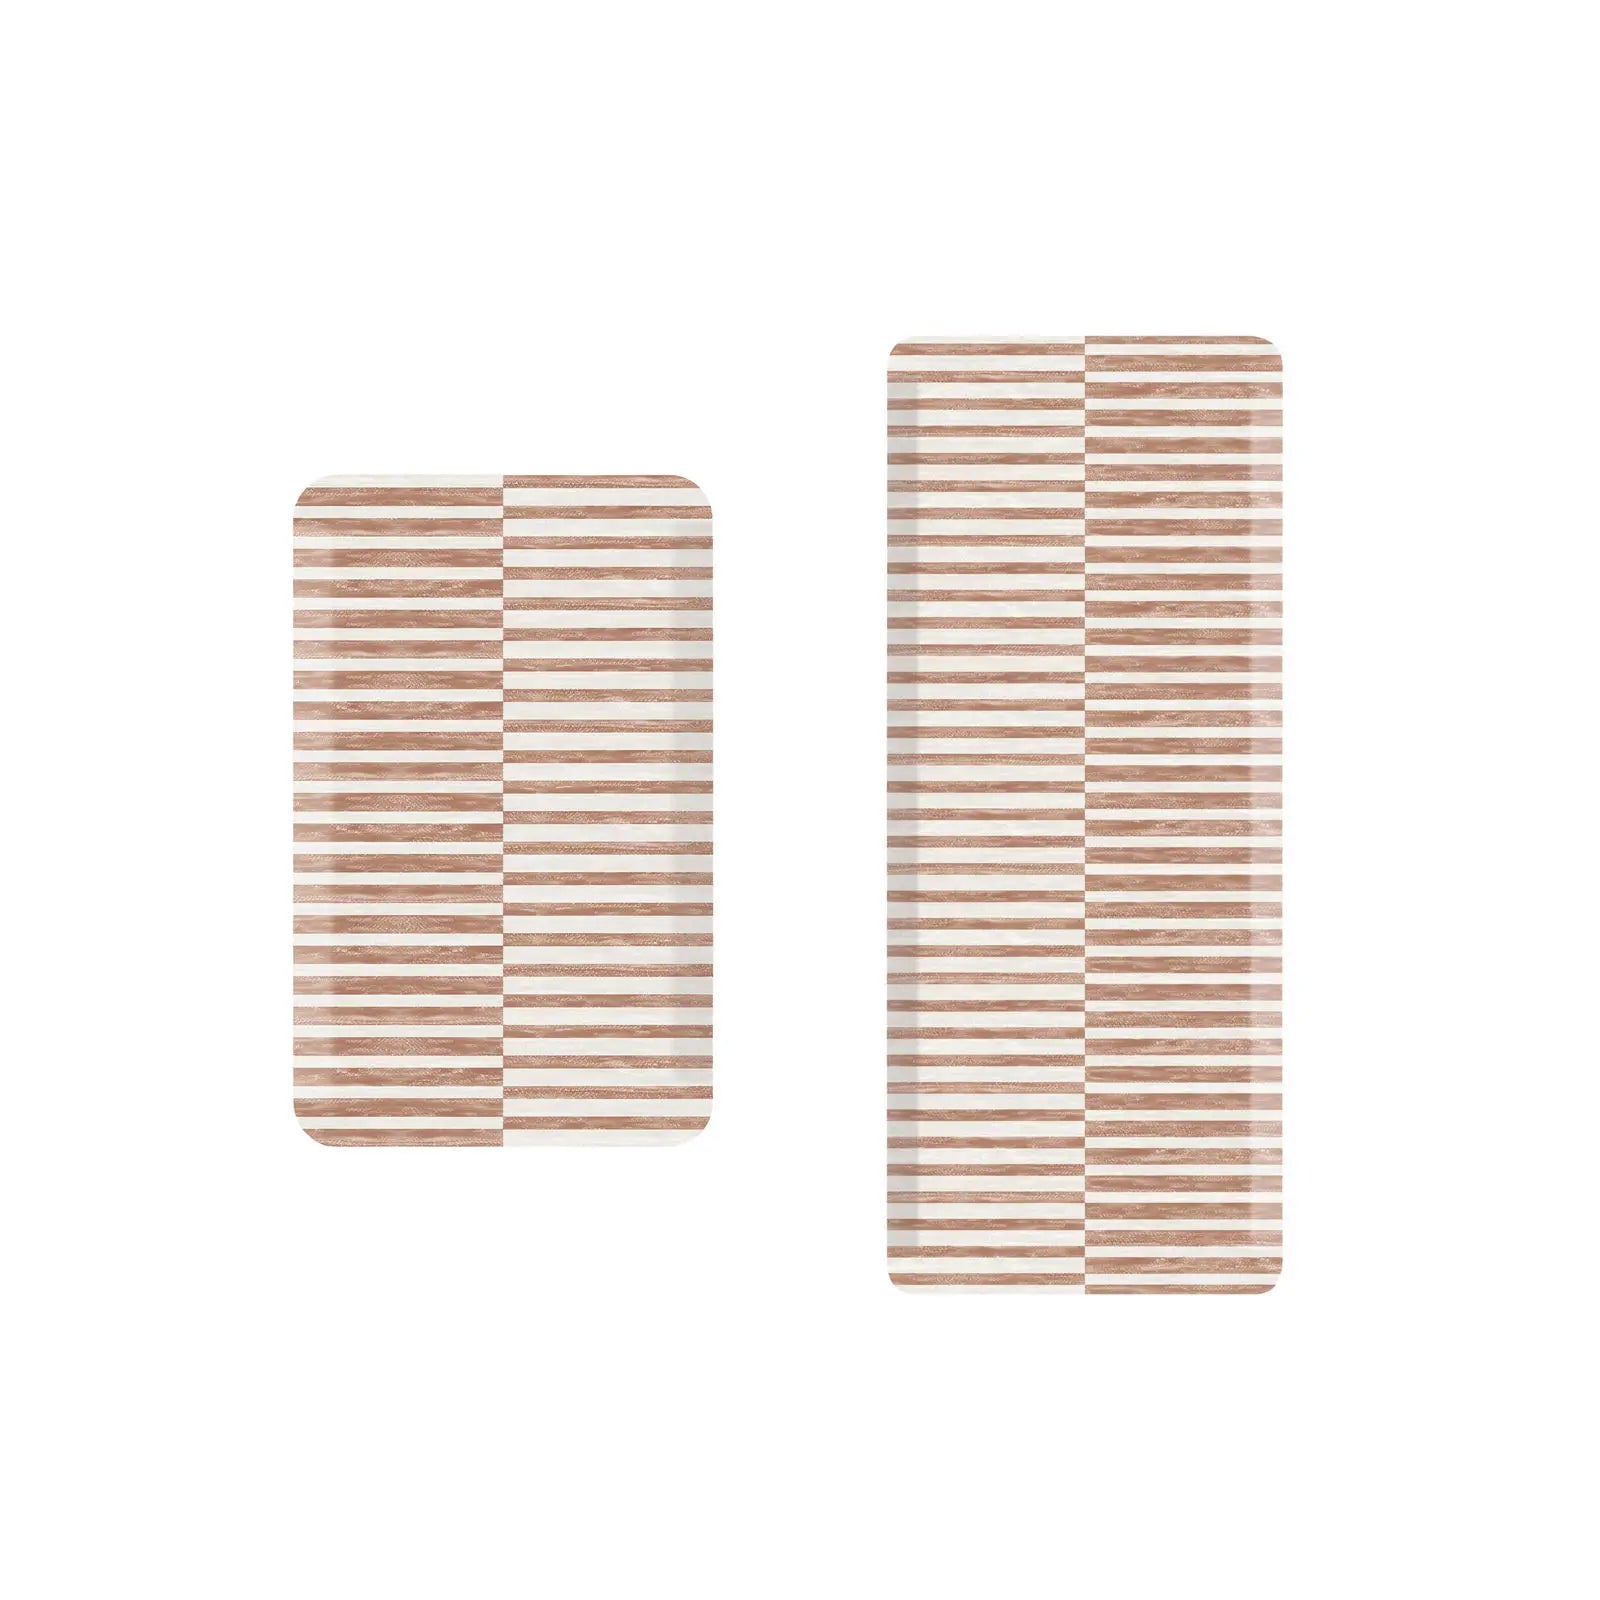 Reese terracotta brown and white striped standing mat shown in sizes 22x36 and 22x54